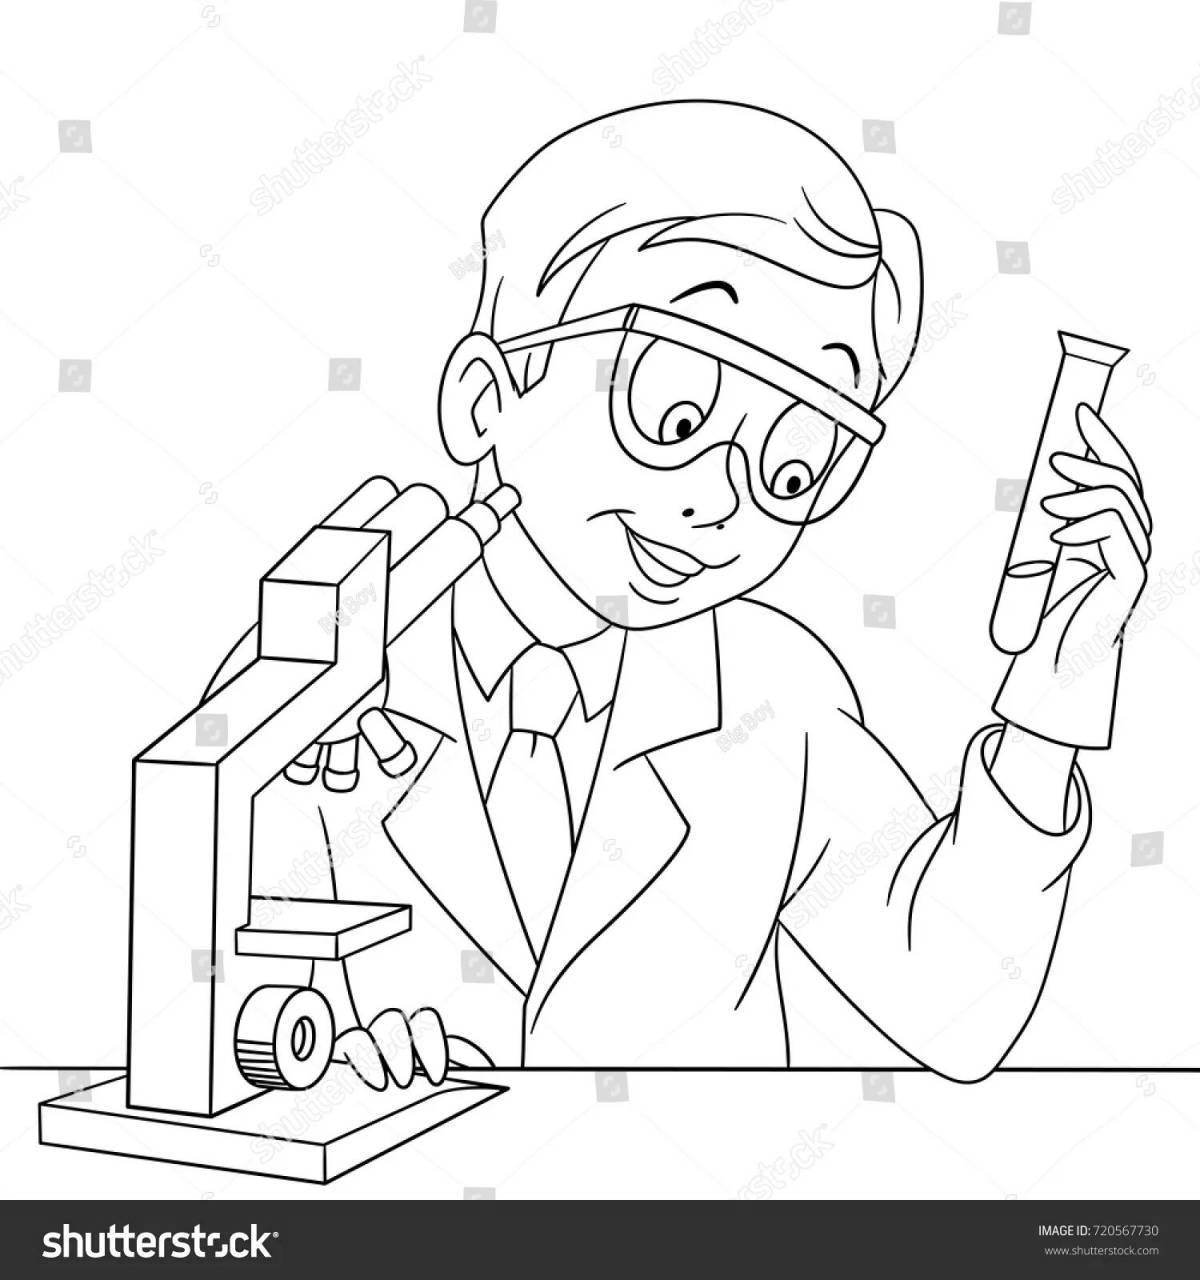 Scientists coloring pages for kids